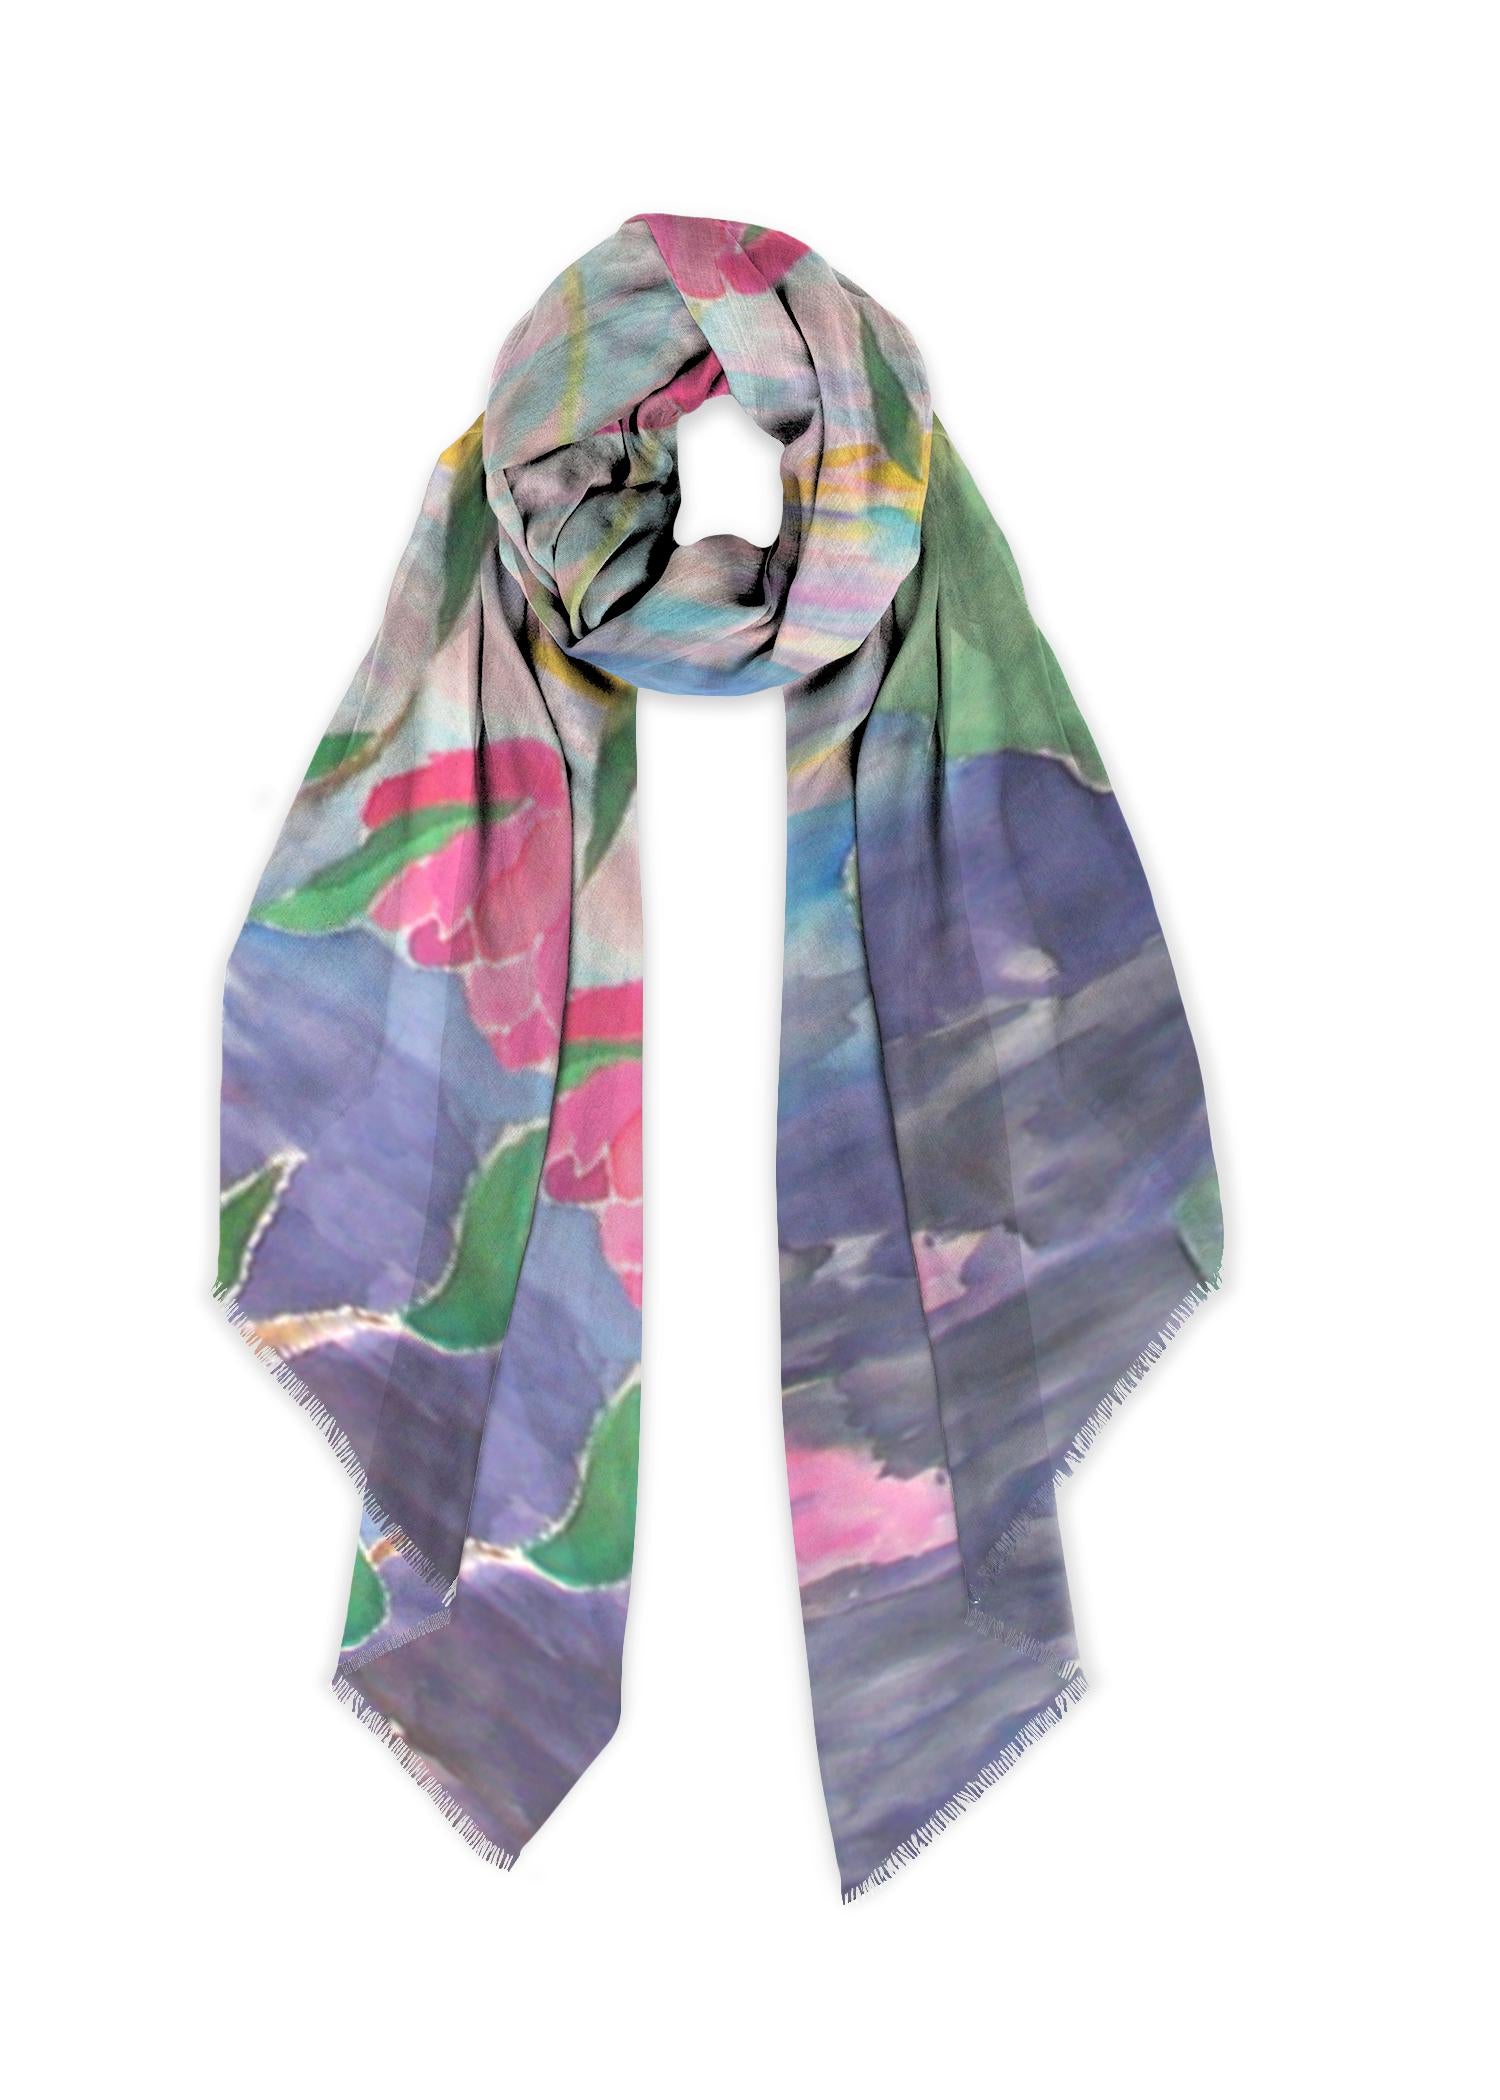 Such soft pastel colors on this long and lovely scarf.  Perfect for plus size.